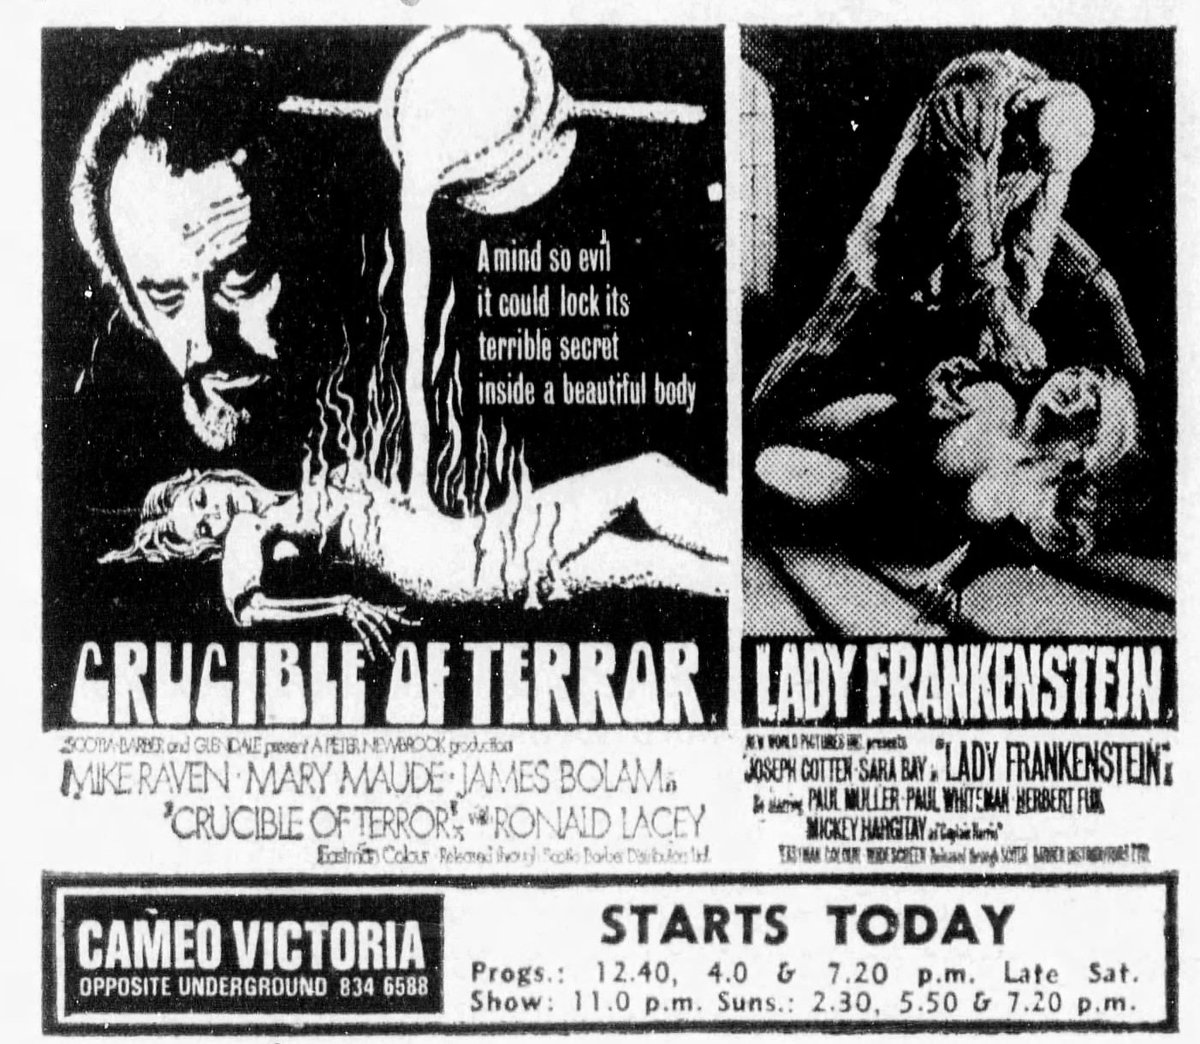 Opening at the Cameo Victoria, on this day, April 13th, 1972..CRUCIBLE OF TERROR with LADY FRANKENSTEIN..